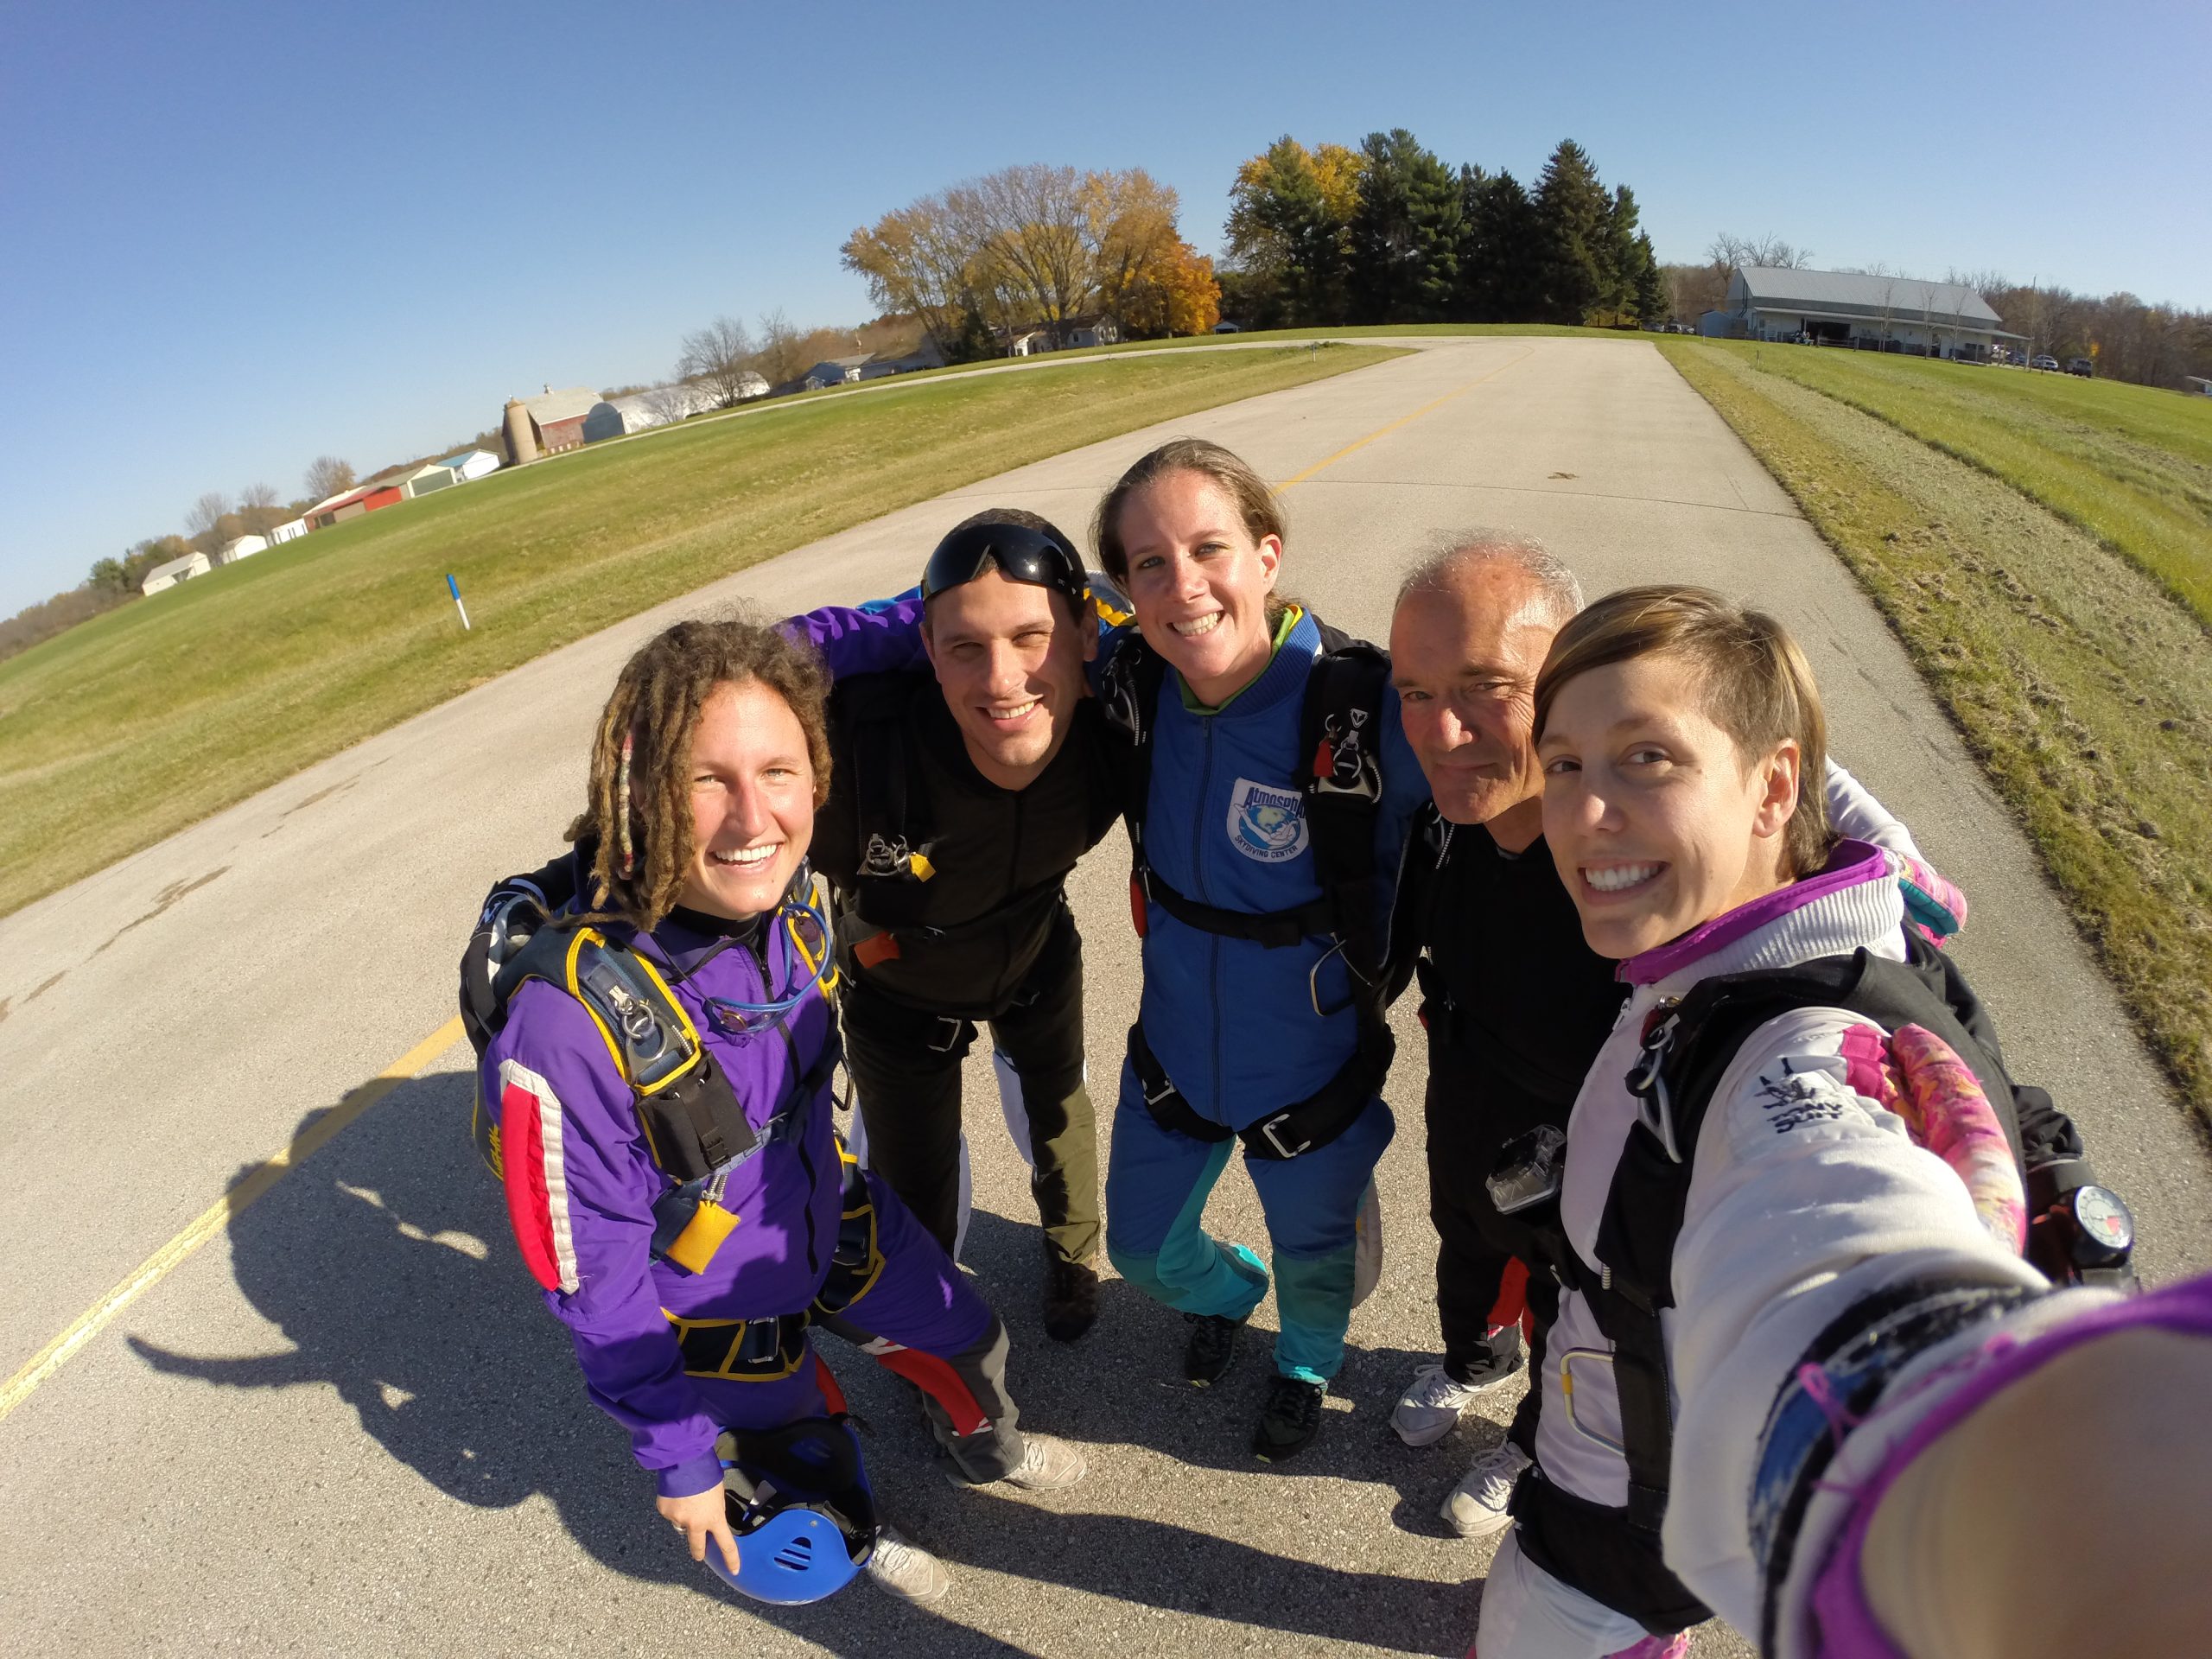 Group of skydiving instructors at Wisconsin Skydiving Center near Milwaukee, WI